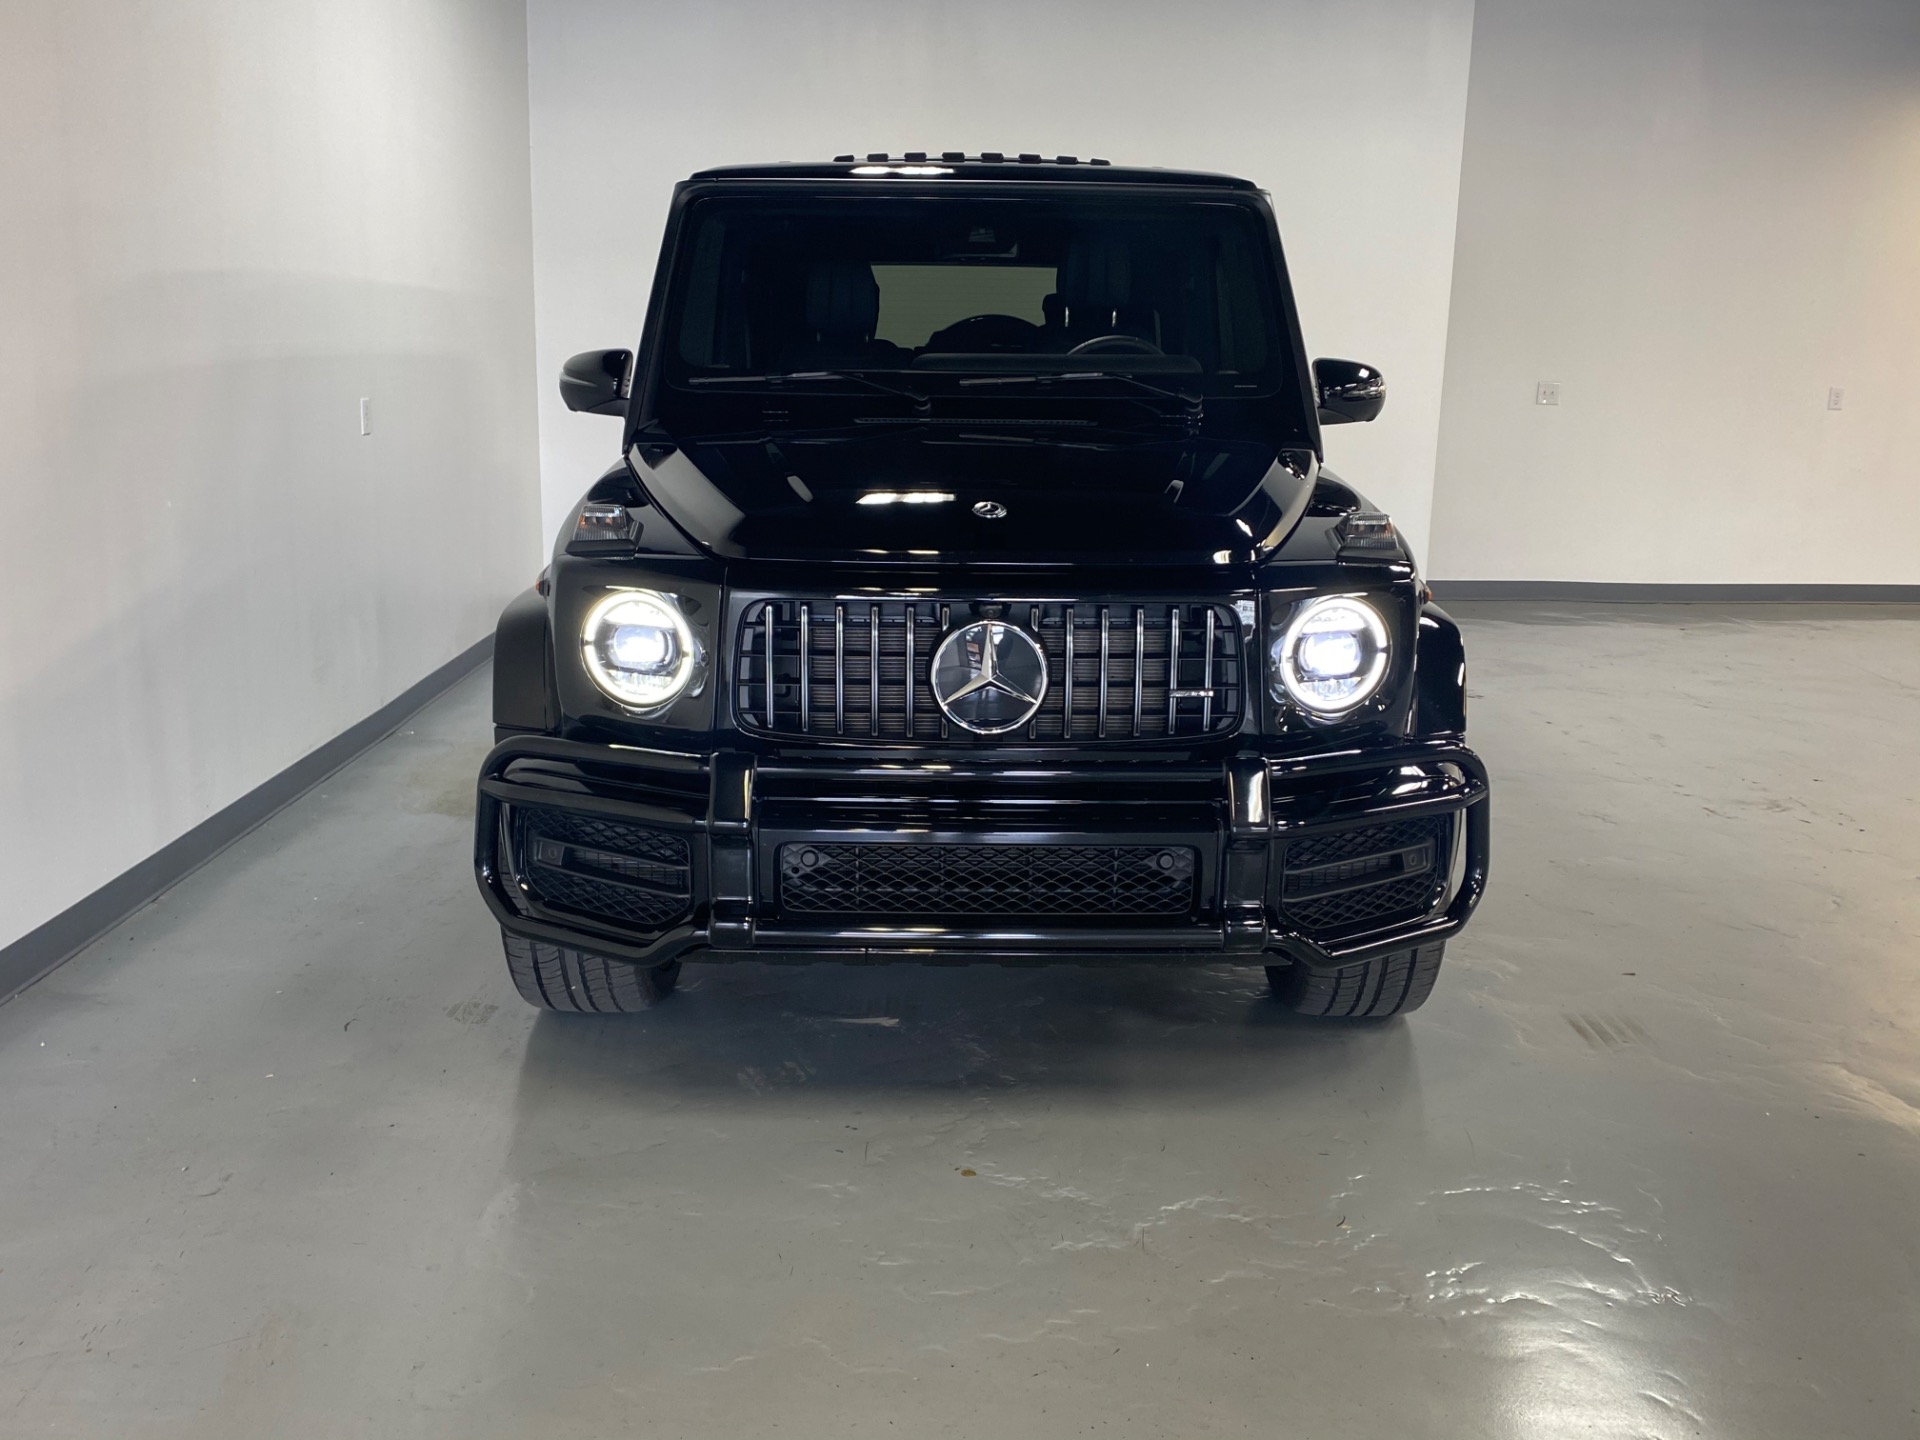 Used Obsidian Black Metallic Mercedes Benz G Class G63 Amg Awd Amg G 63 For Sale Sold Prime Motorz Stock 2928